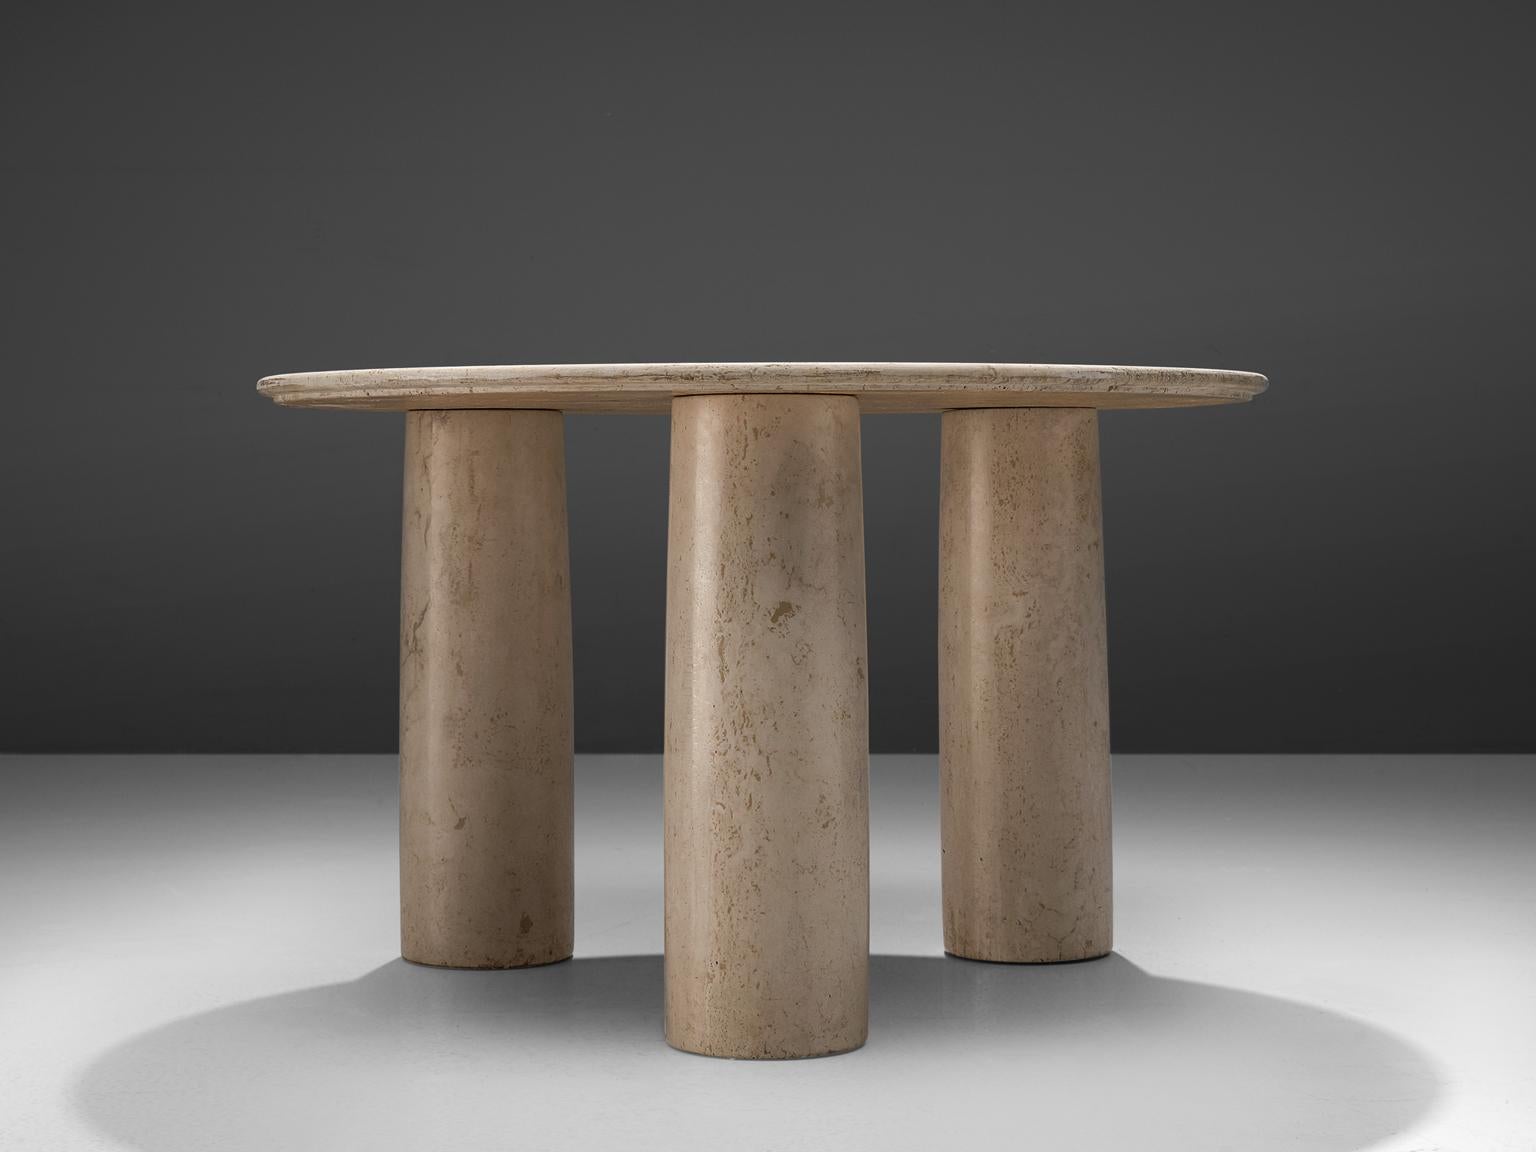 Mario Bellini for Cassina, table 'Il Colonnato', travertine, Italy, 1970s.

This exceptional 'Il Colonnato' dining table was designed by Italian designer Mario Bellini (1935-). This architectural table is a skillful example of postmodern design.